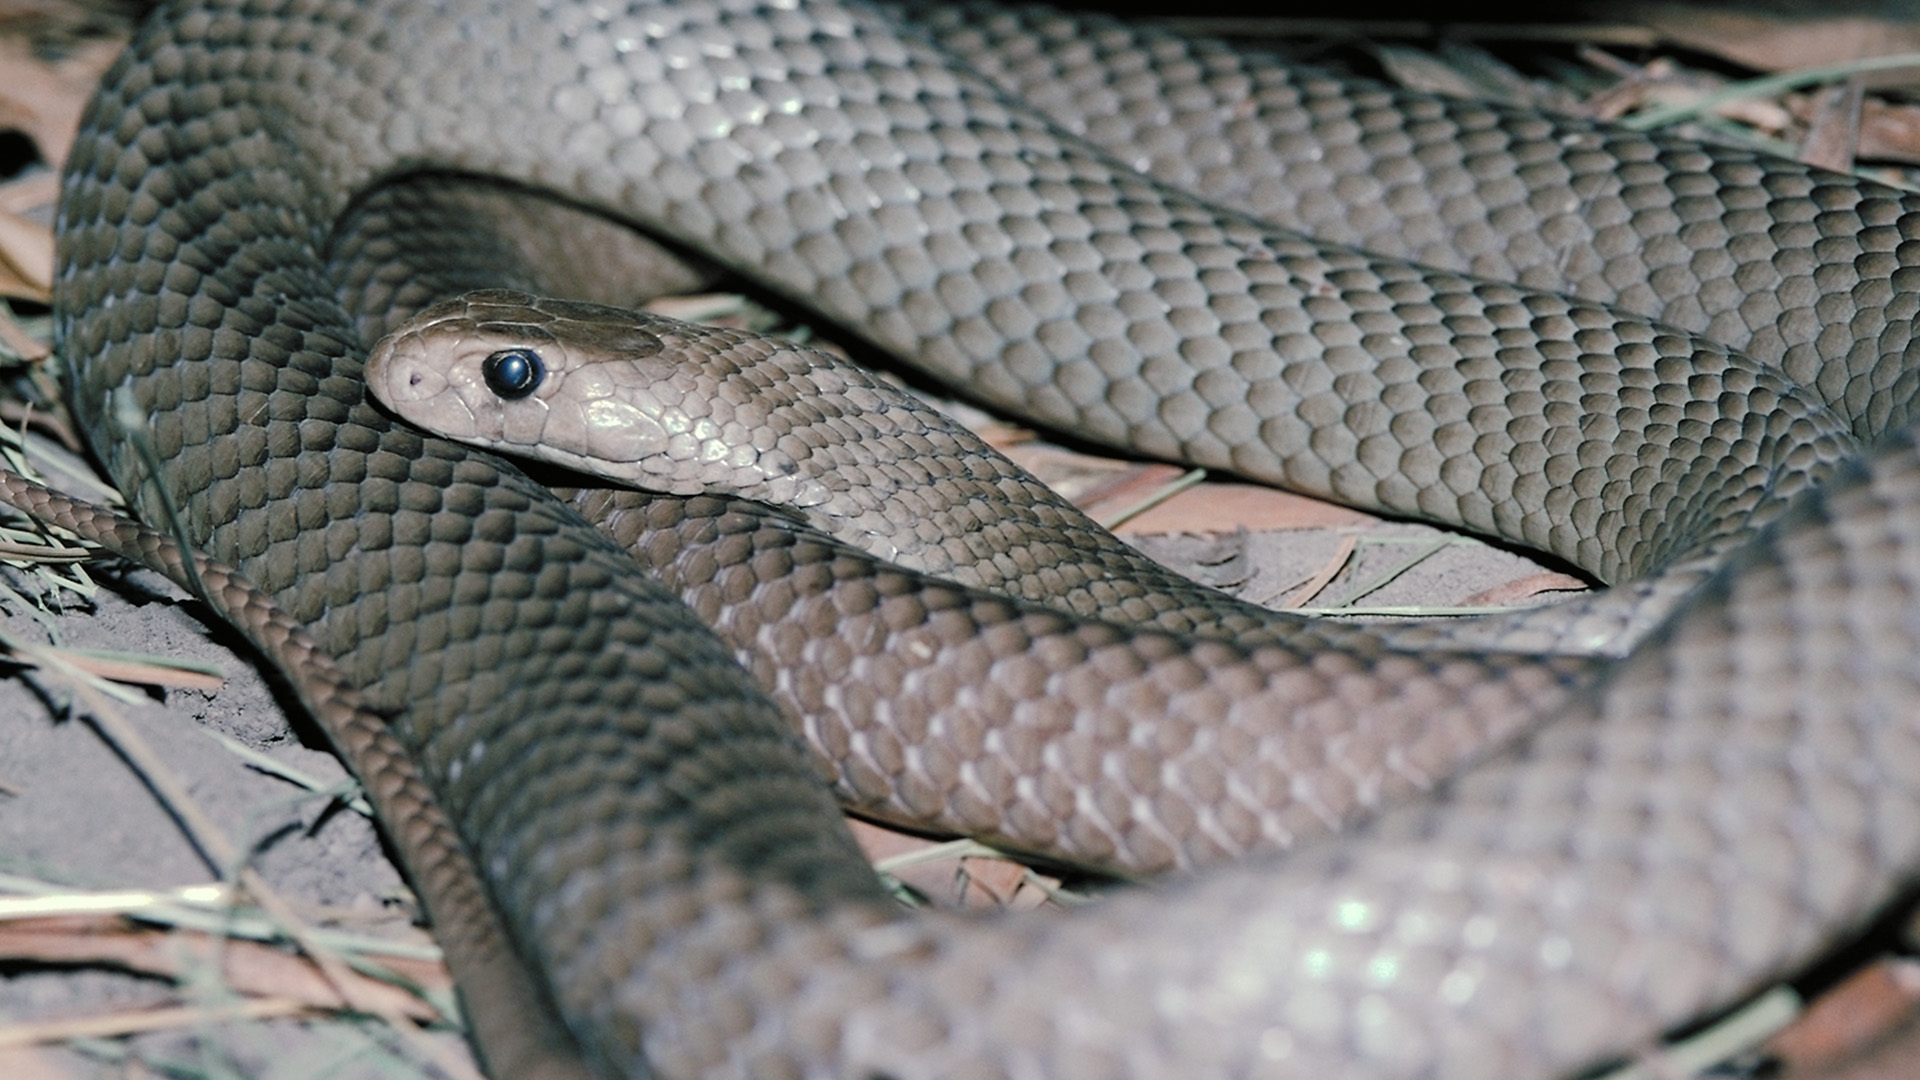 Venomous Taipan Snake This is from Deadly Dozen. [Photo of the day - March 2023]